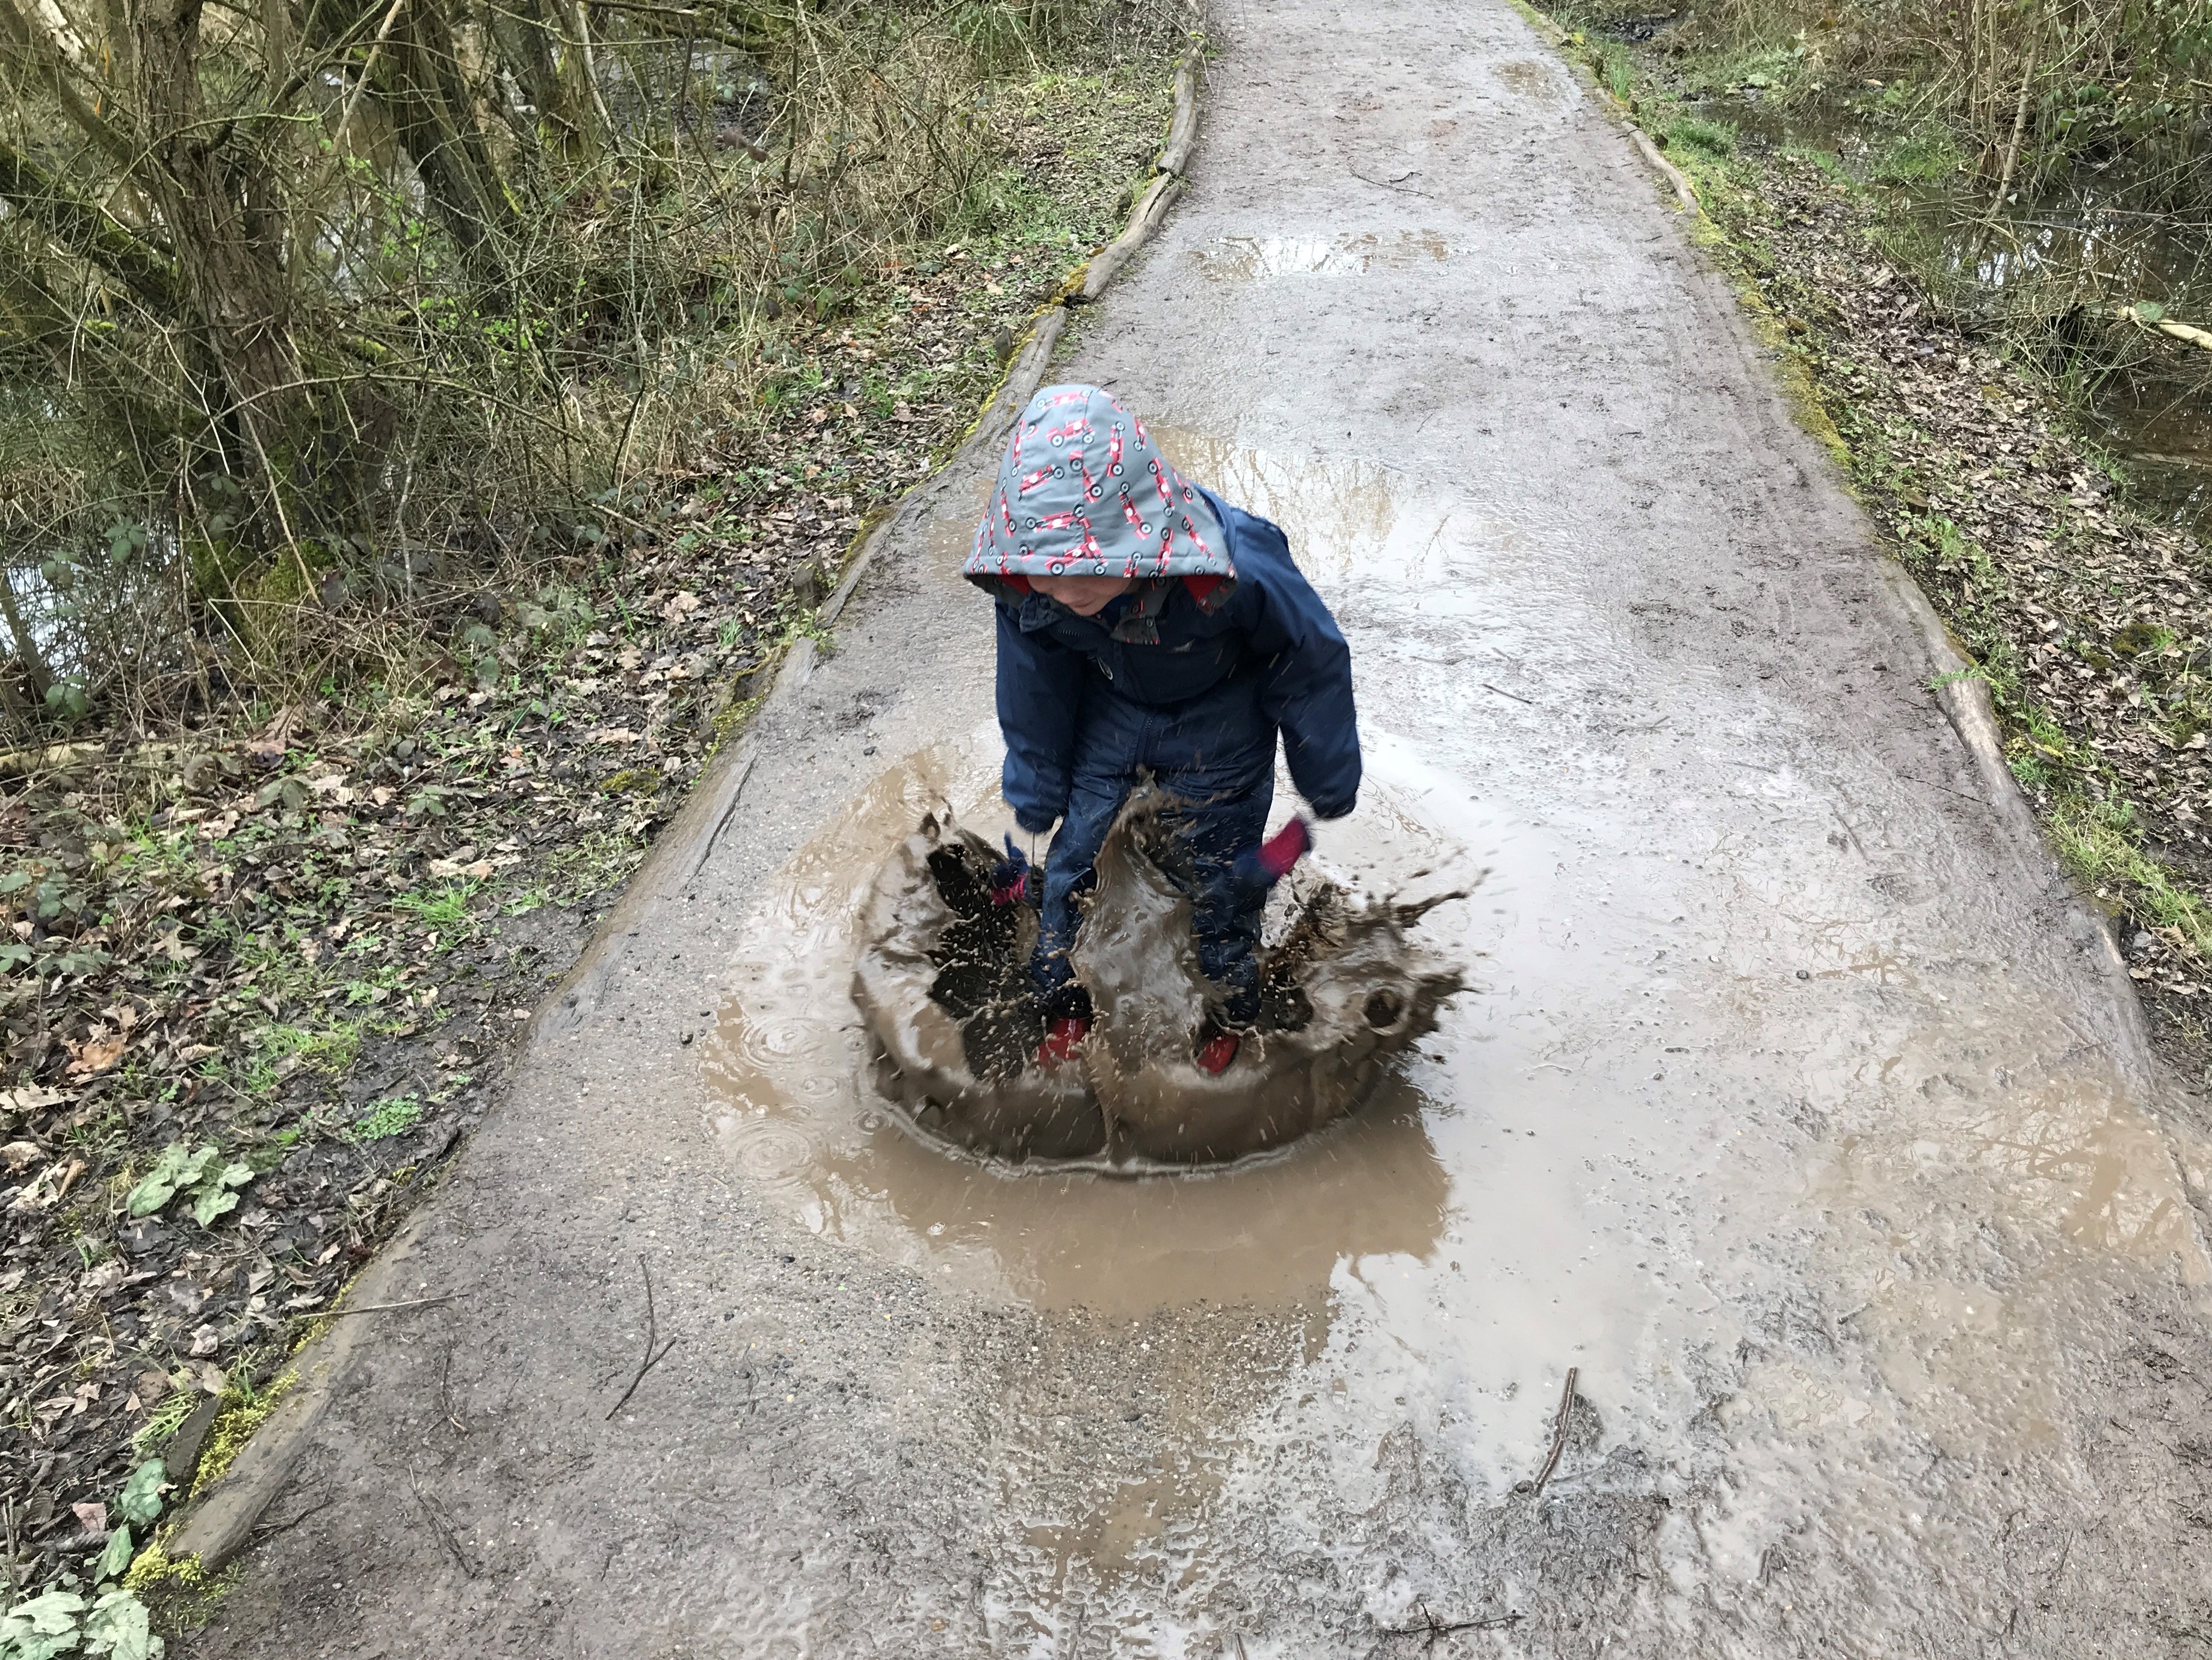 Boy jumping in a muddy puddle at Shorne Country park